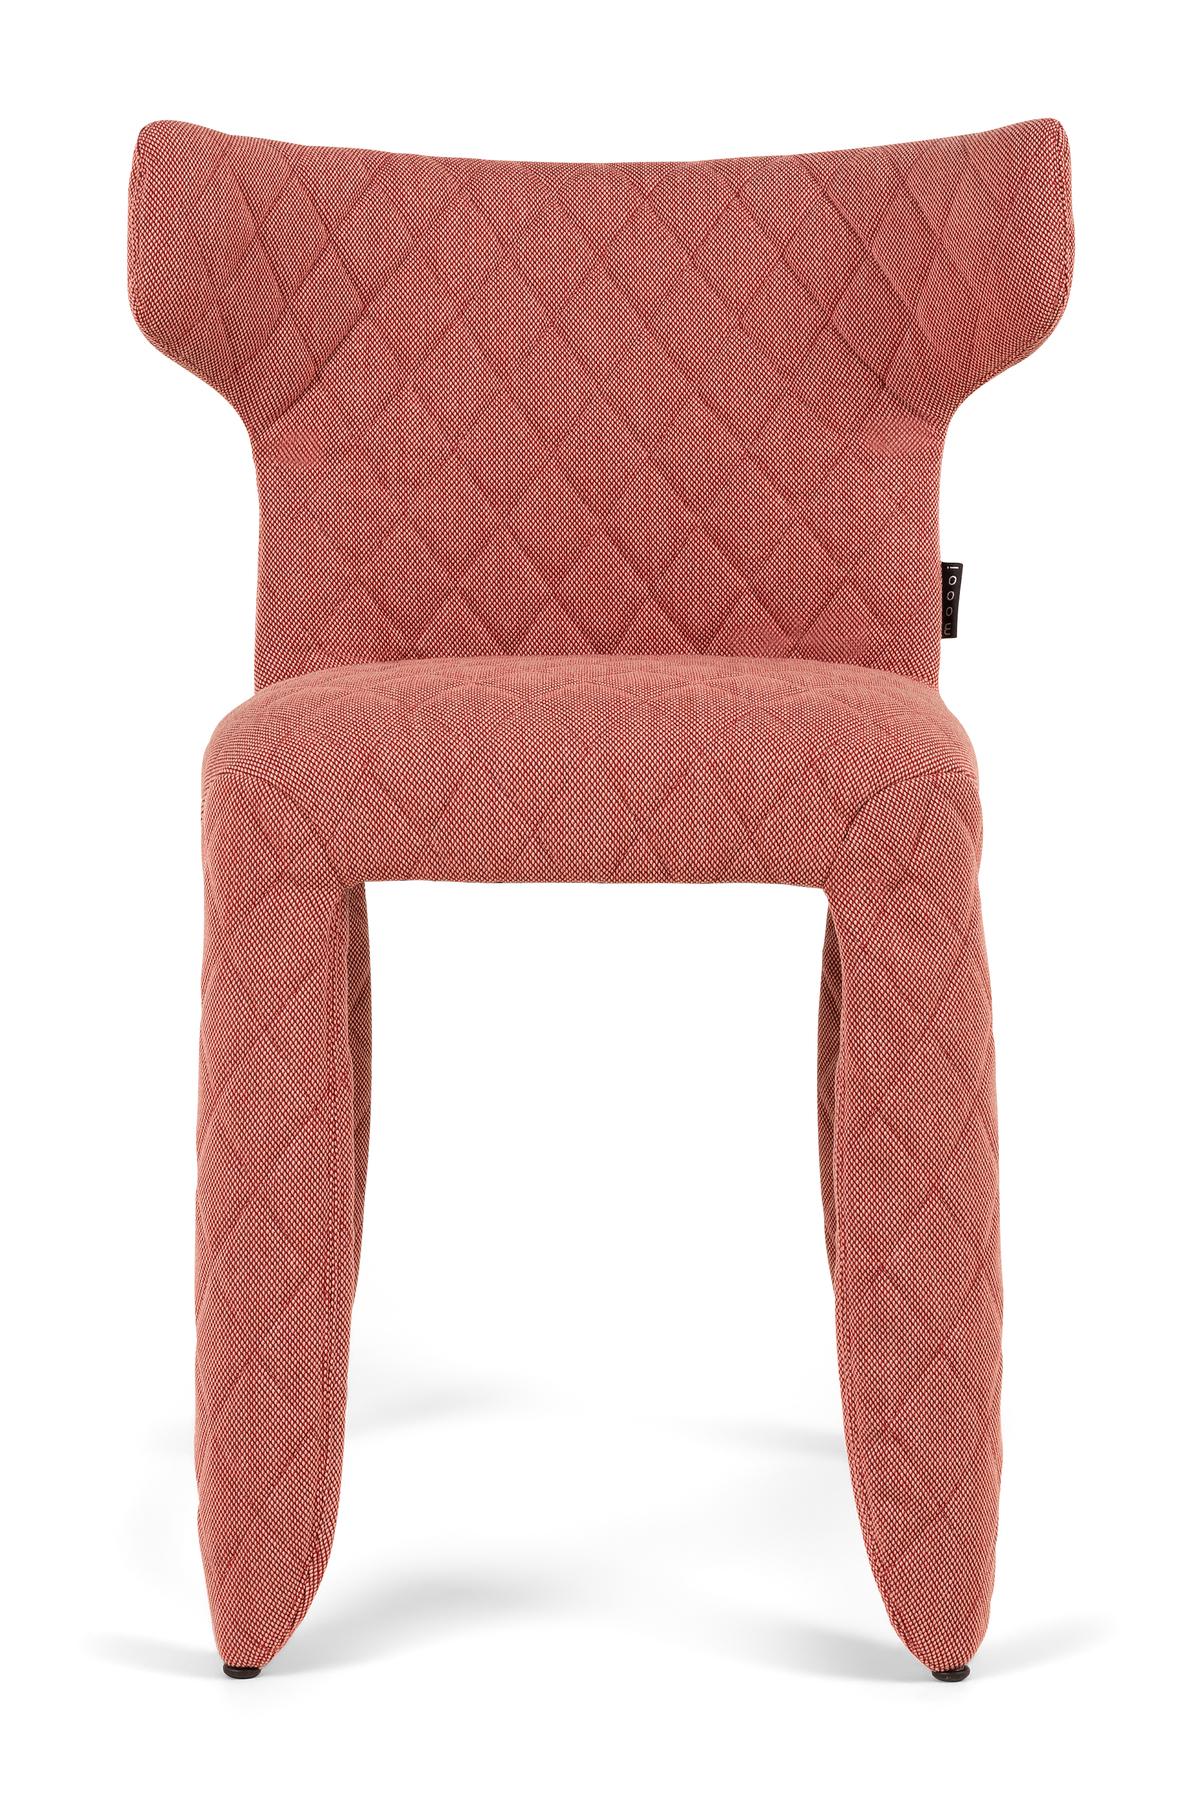 A soft, puffy and stylish chair as symbol of the eternal battle between opposite forces that take place in life and can be easily recognized inside ourselves, if we have the courage to open our eyes. Scary? Not at all! You forget all about the